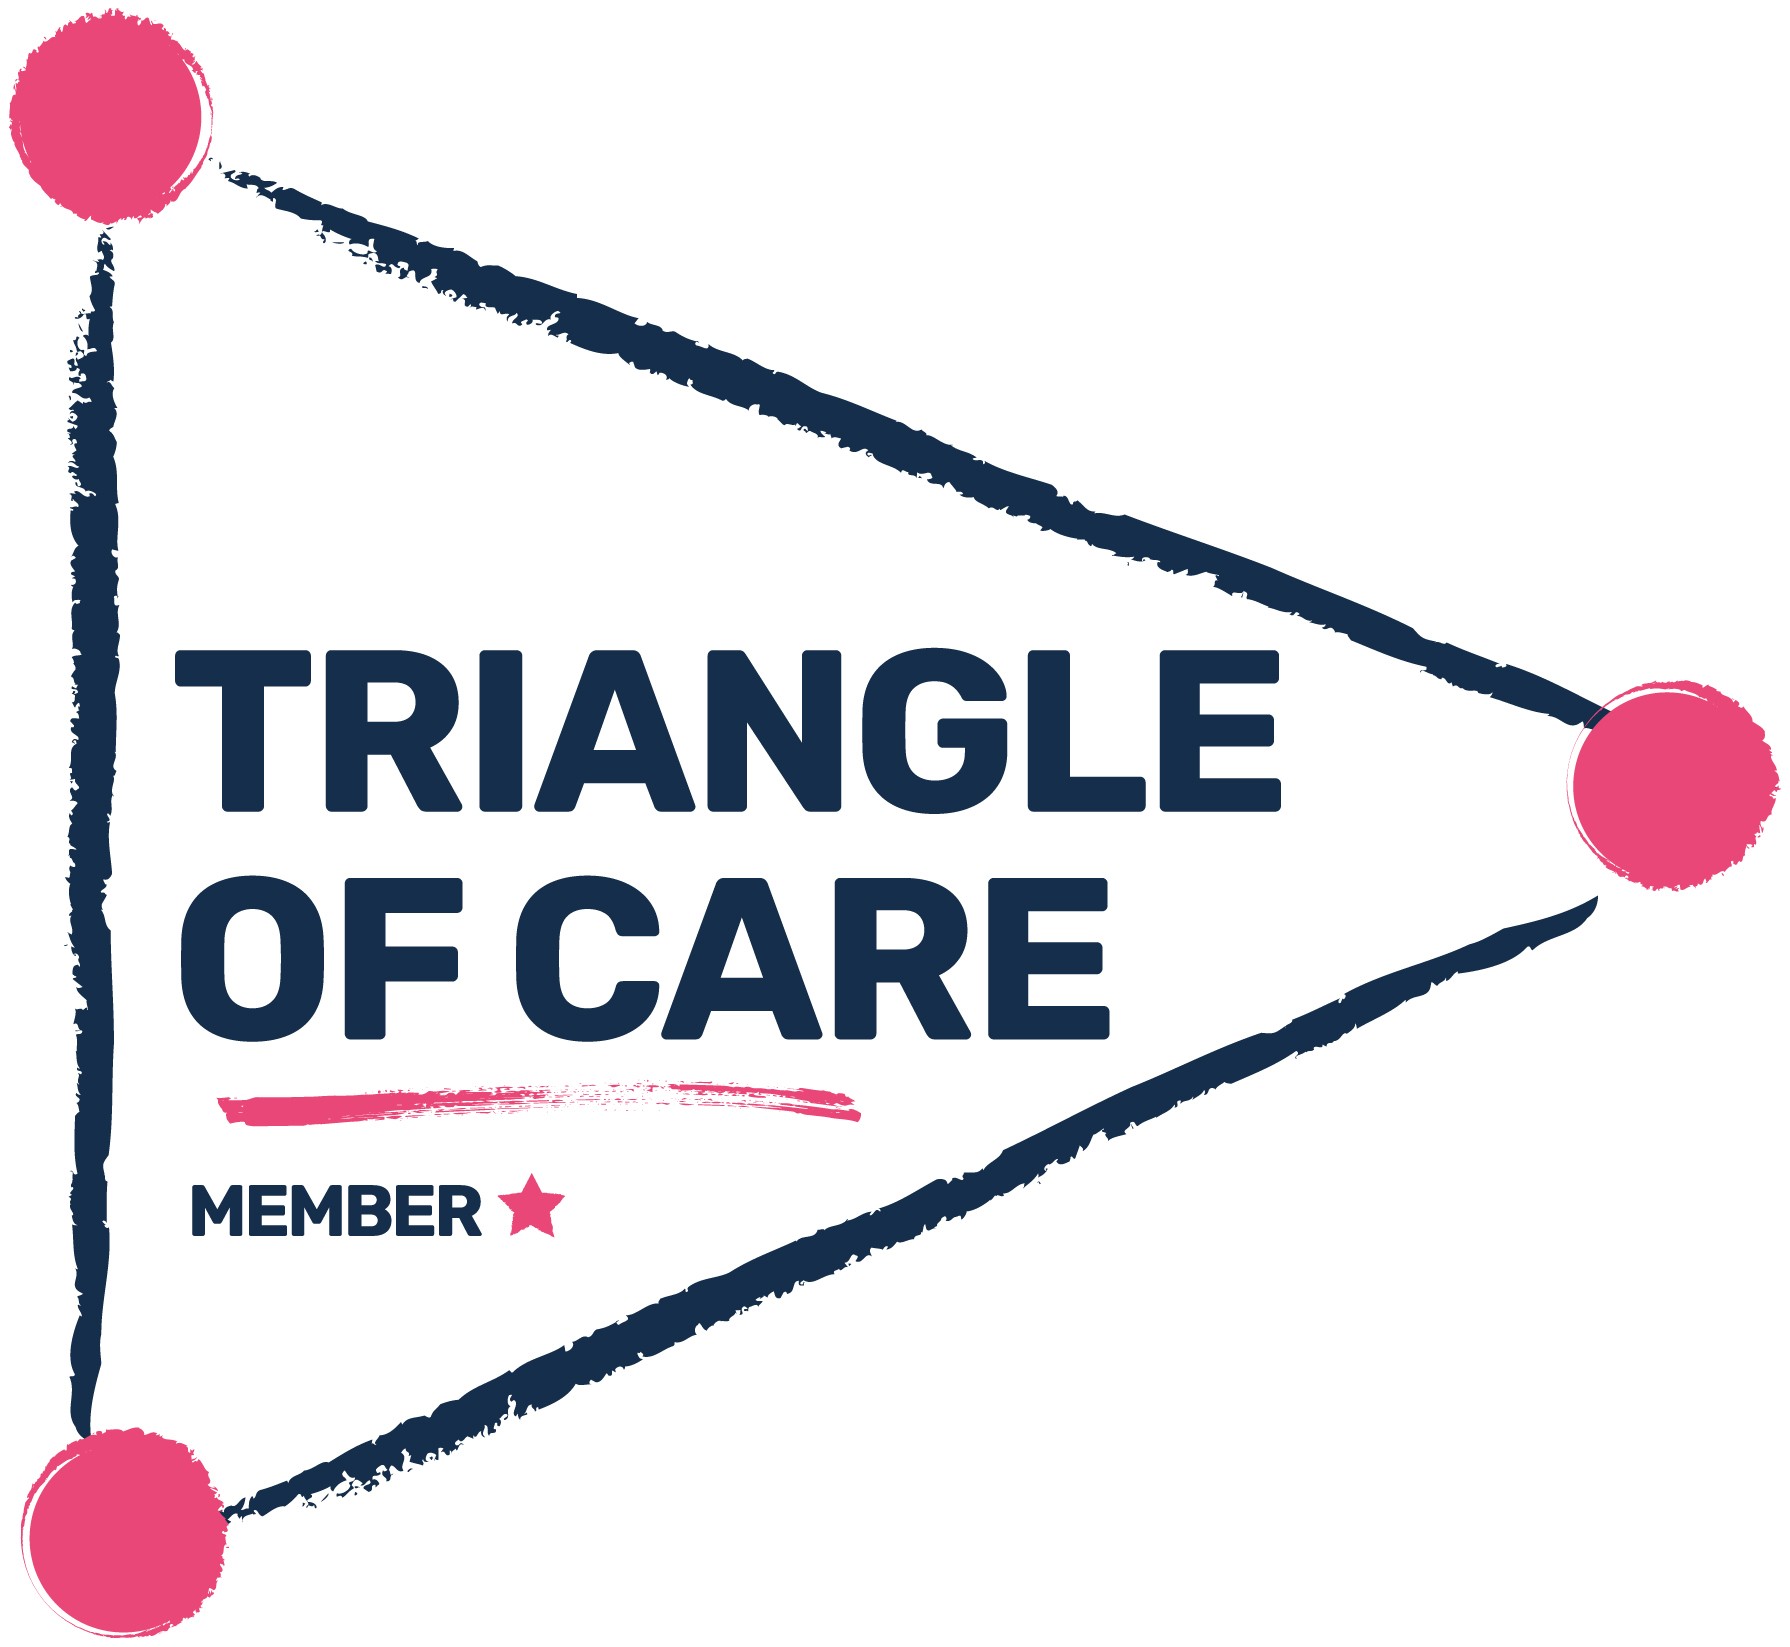 The Triangle of Care member logo